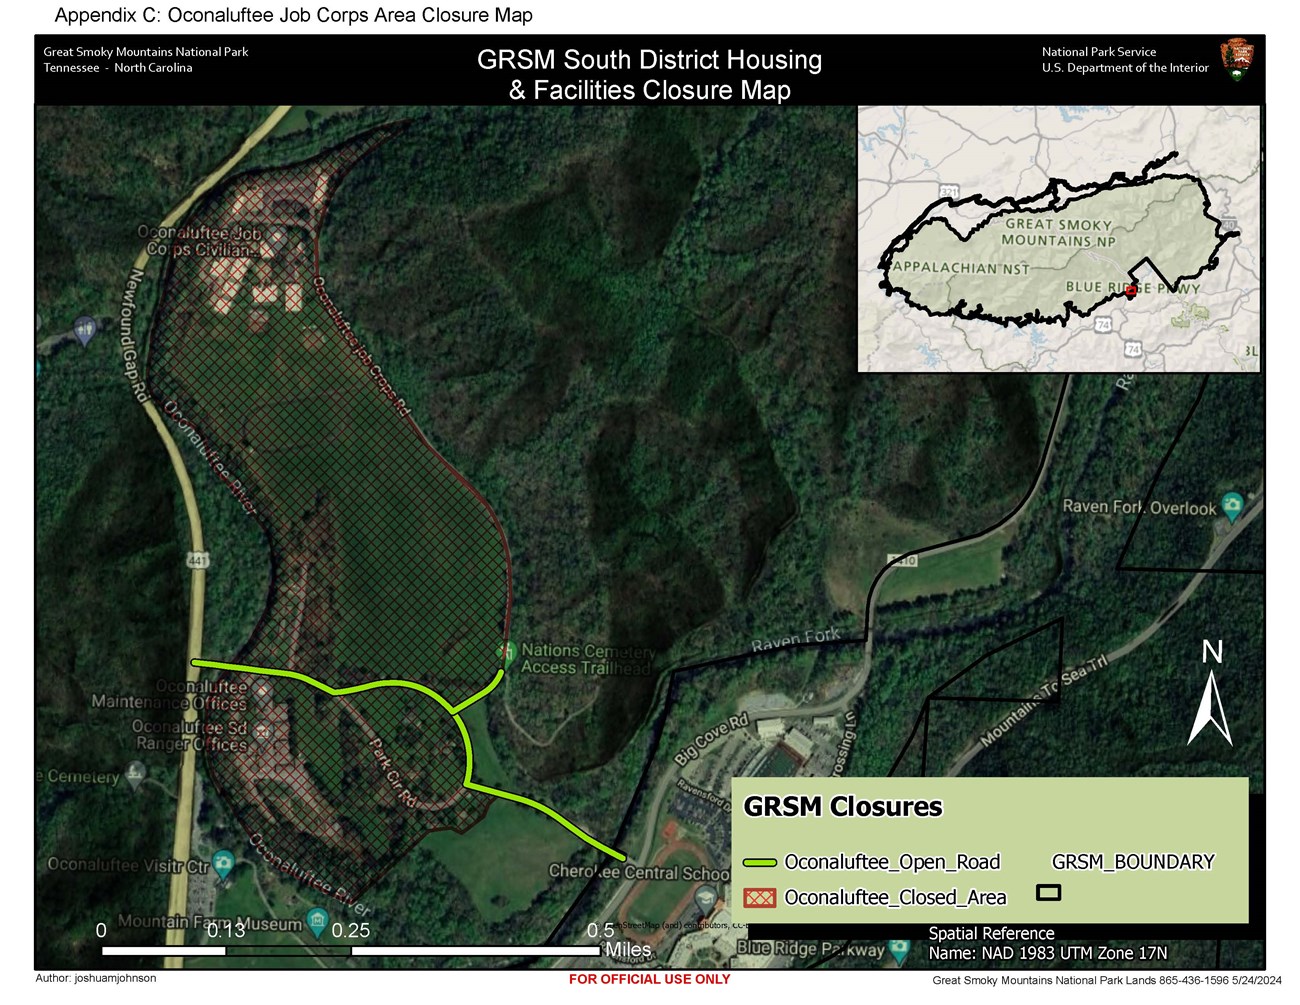 South district housing & facilities closure map. Bright green line east of Newfound Gap Road (open) enclosed by crisscrossed orange shading (closure) over field framed by river to west, job corps road to east, building to north. Scale: 0.5 miles